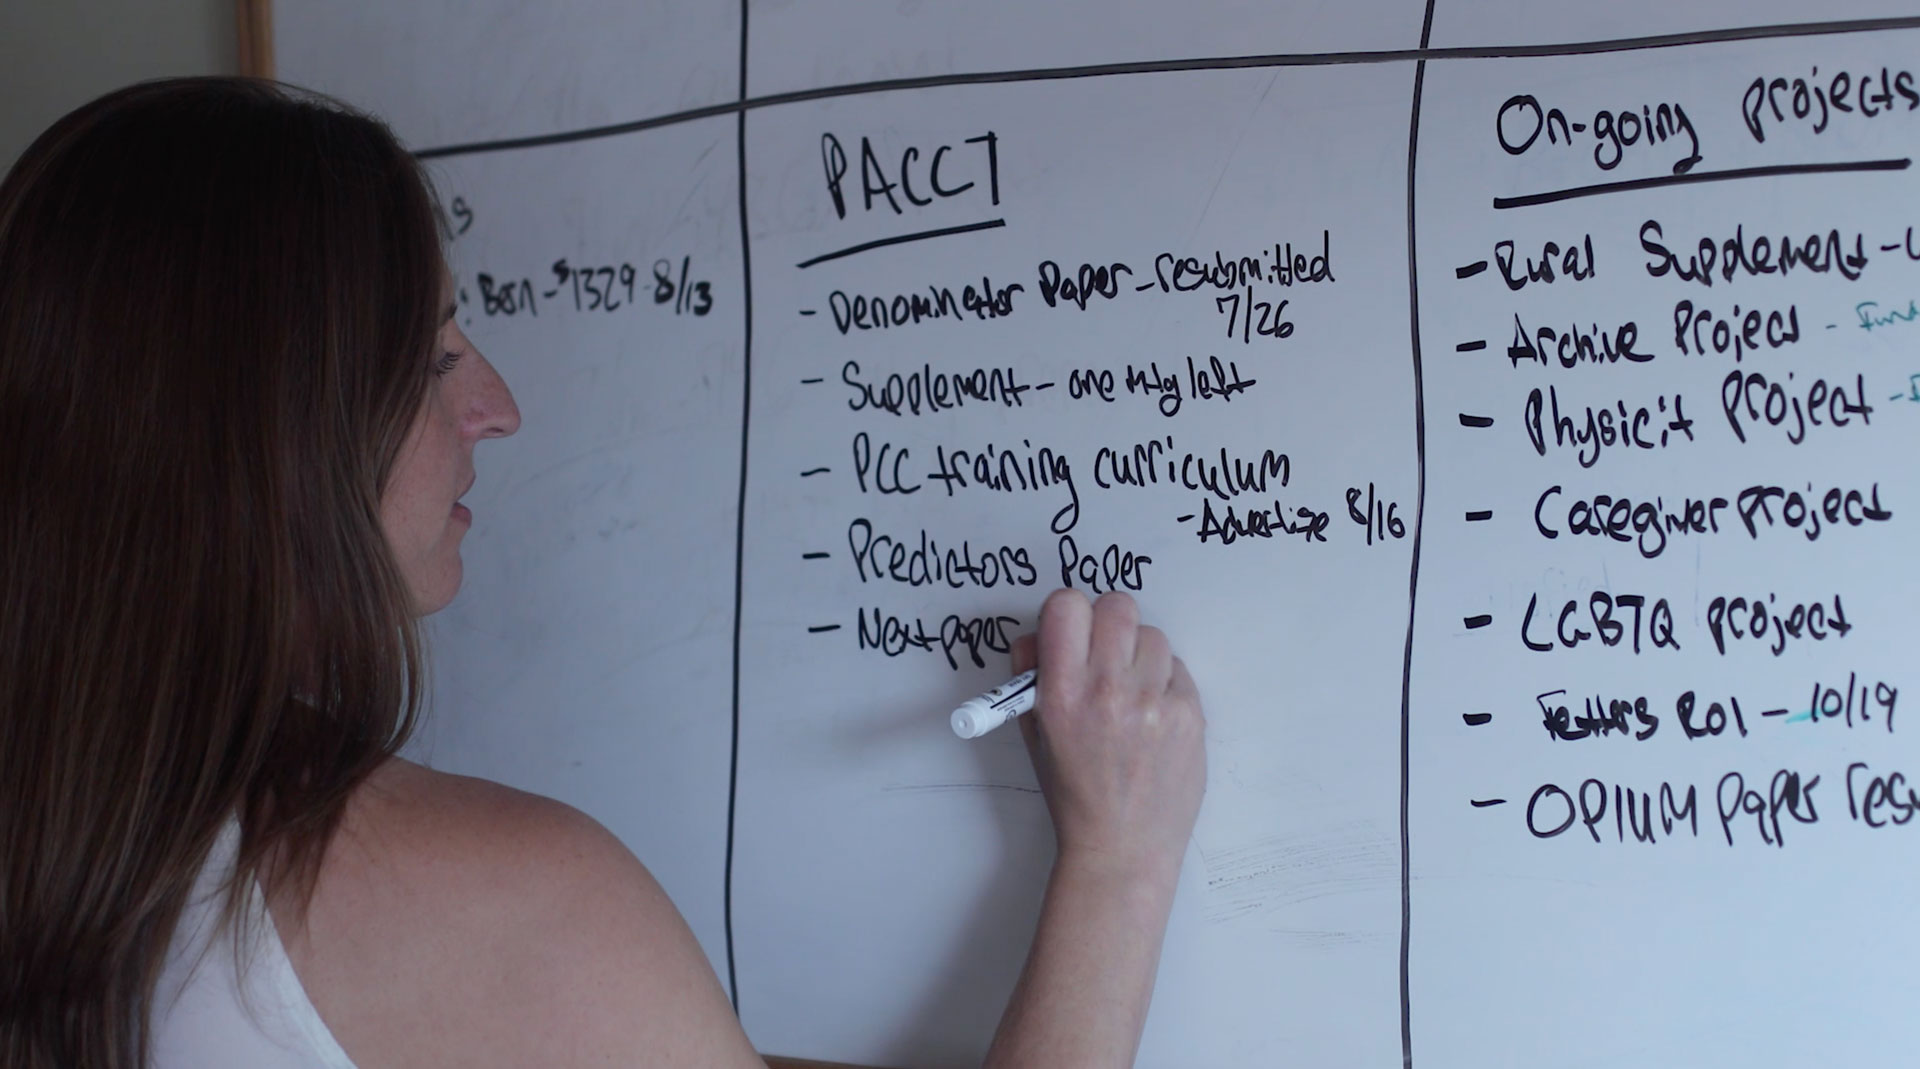 A researcher outlines plans for a research mobile application on a whiteboard